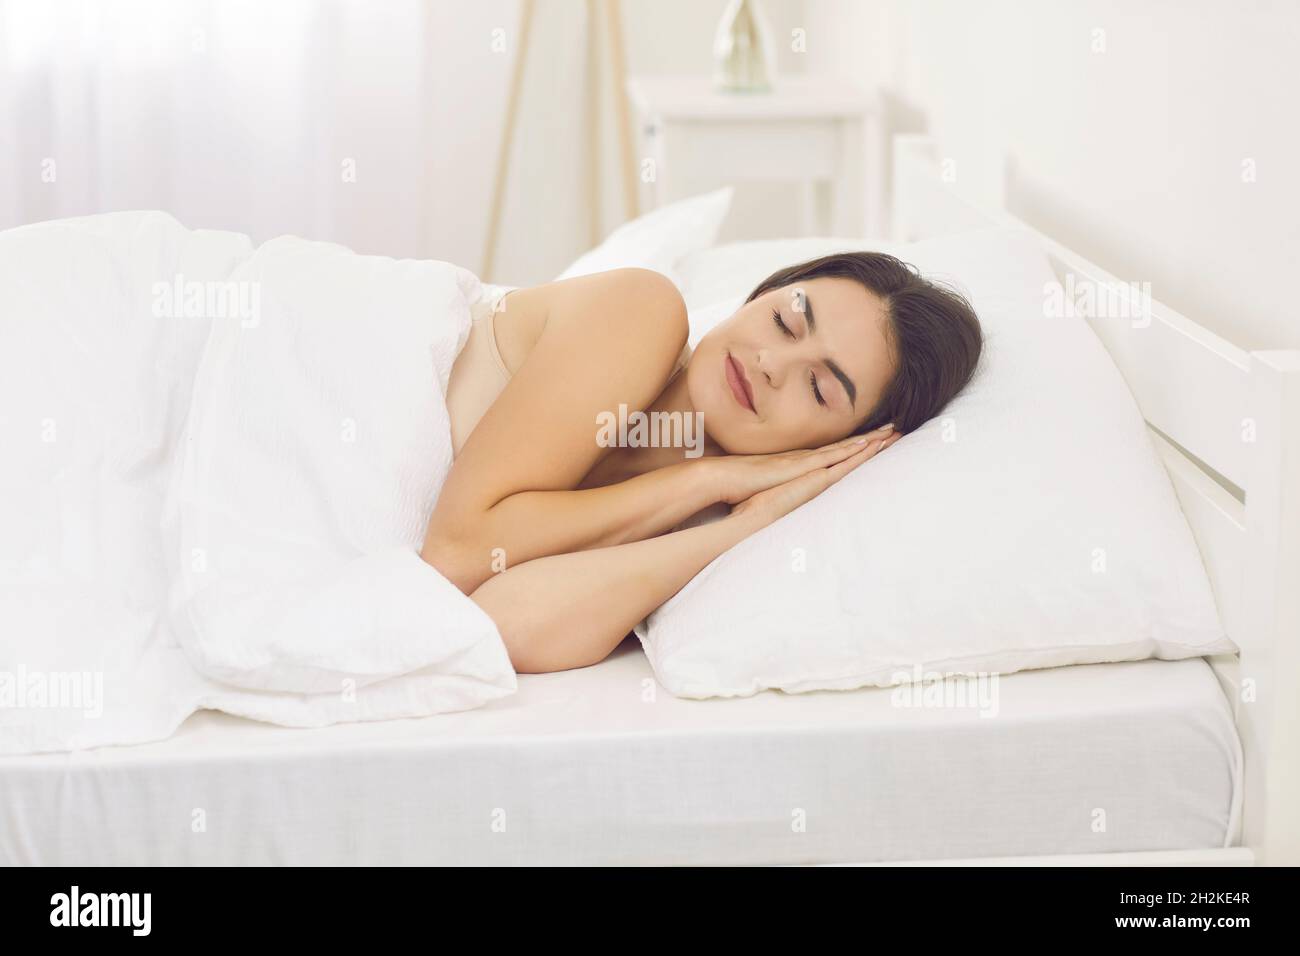 Beautiful woman enjoying good night's sleep on white sheets and pillow in her bed Stock Photo